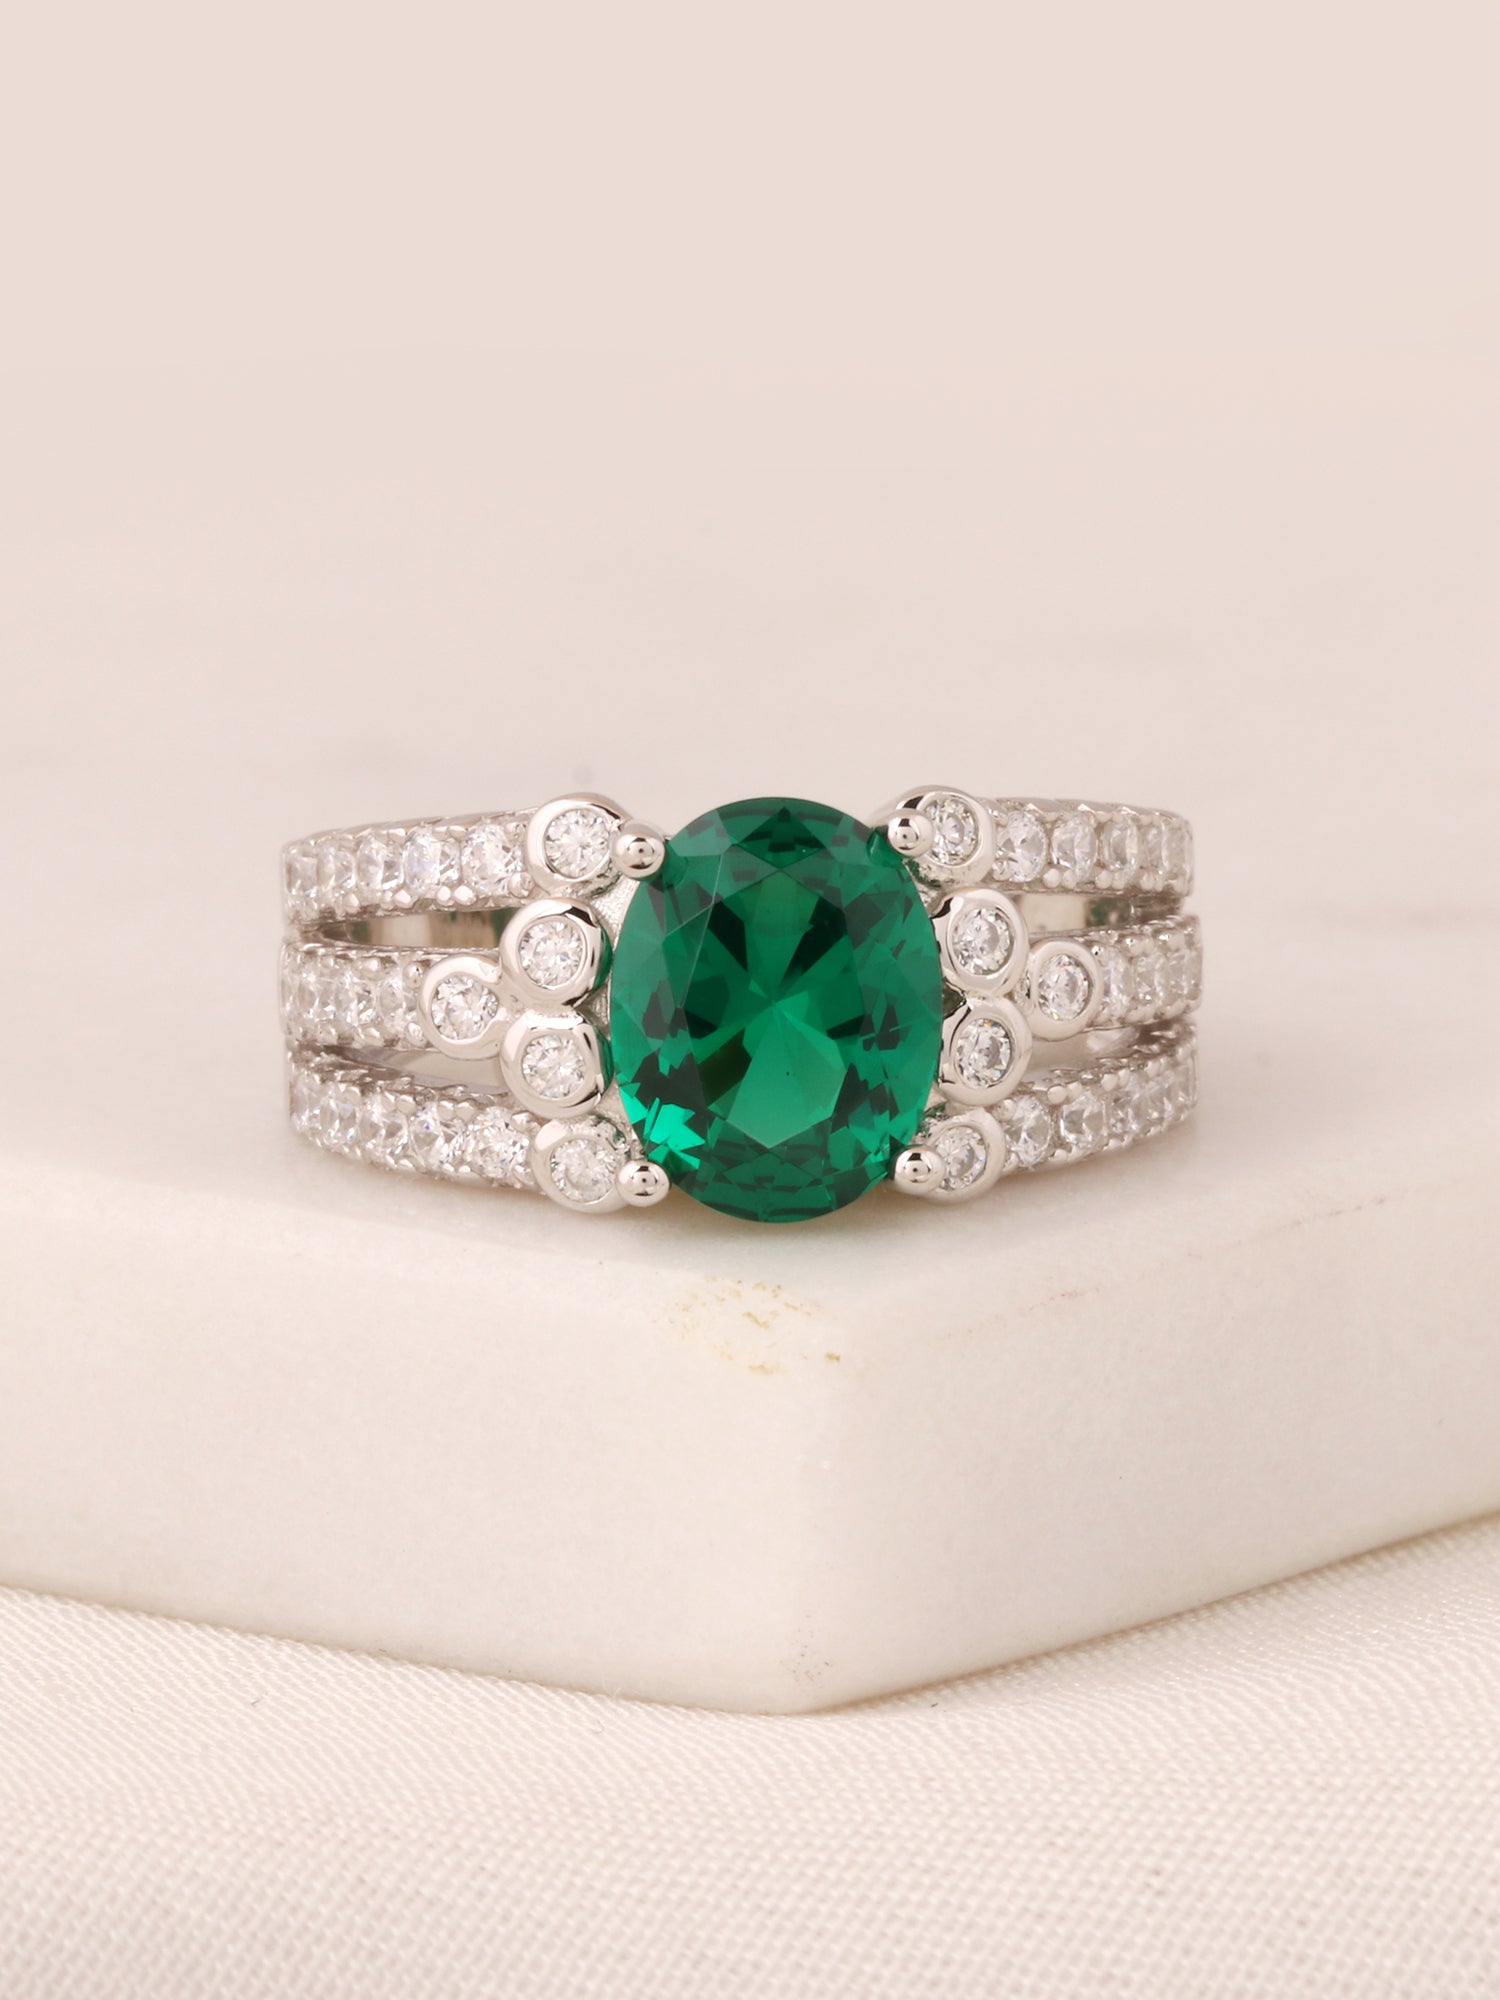 2.5 CARAT OVAL EMERALD SOLITAIRE CLUSTER RING-8